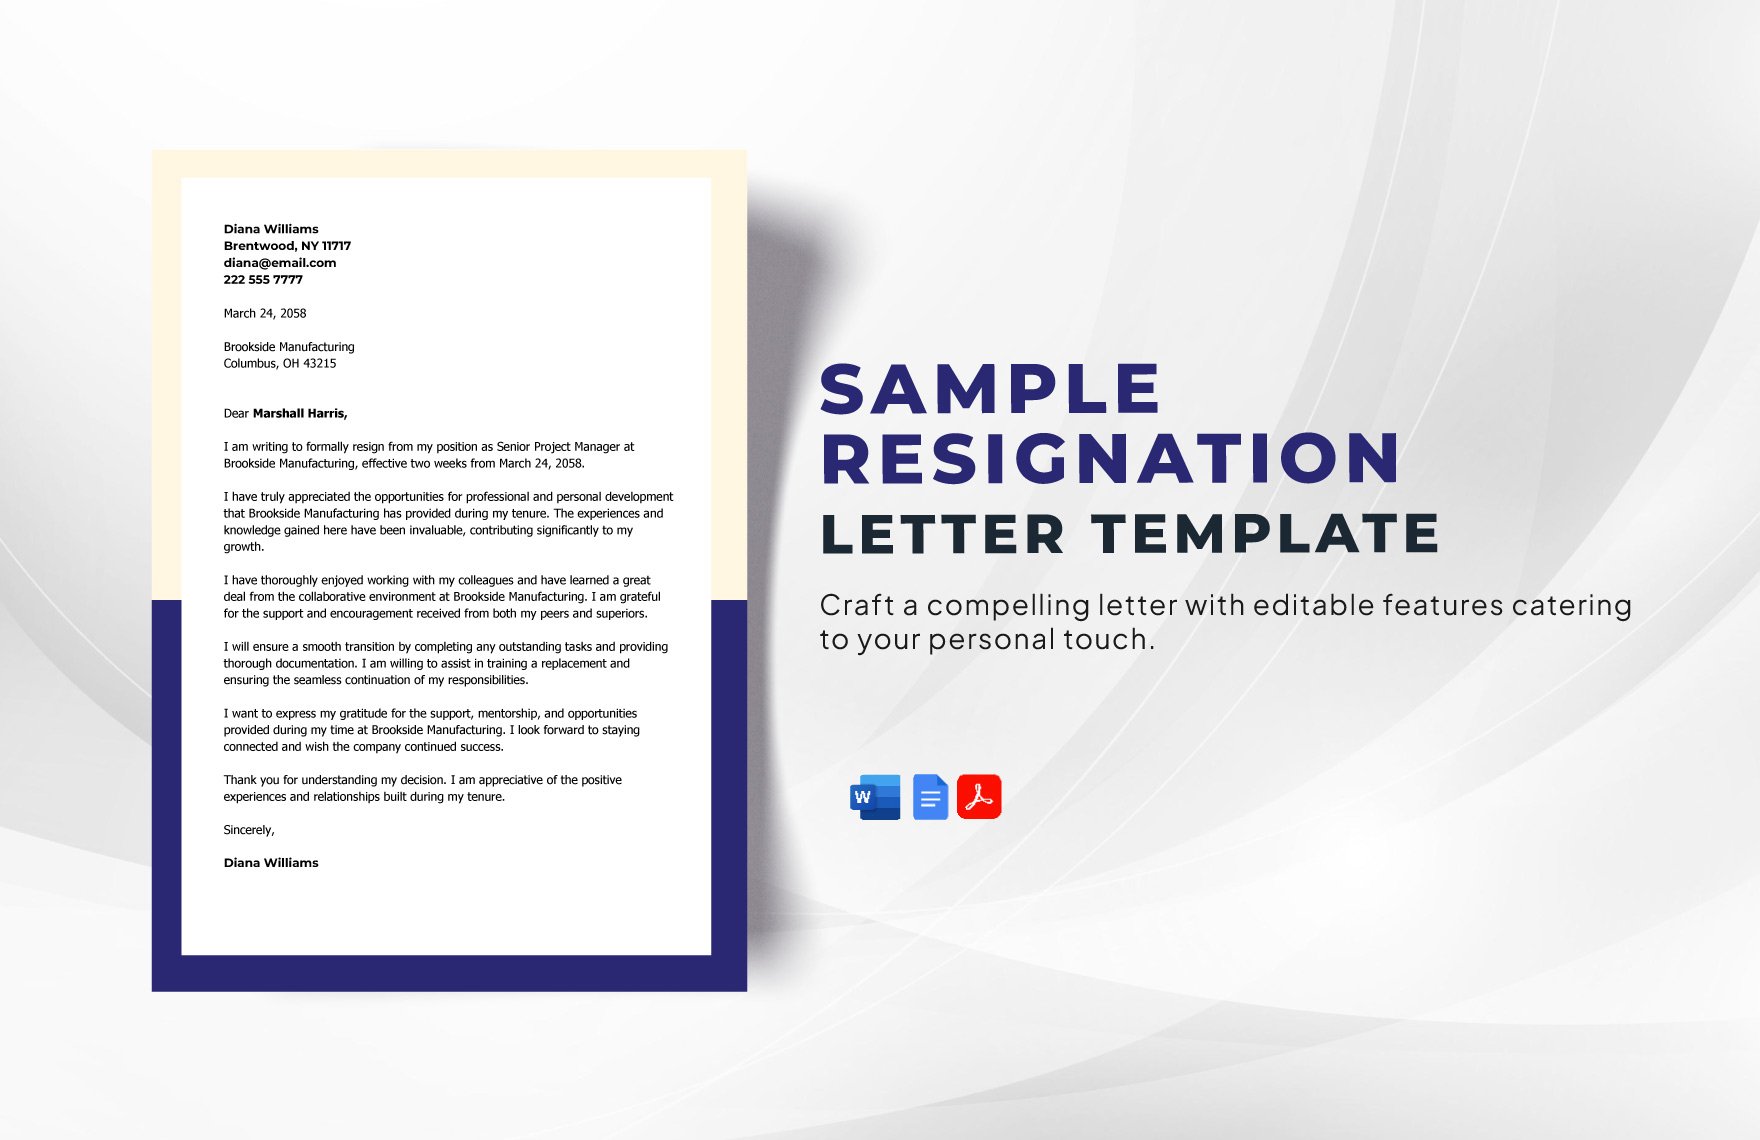 Sample Resignation Letter Template in Word, Google Docs, PDF, Apple Pages